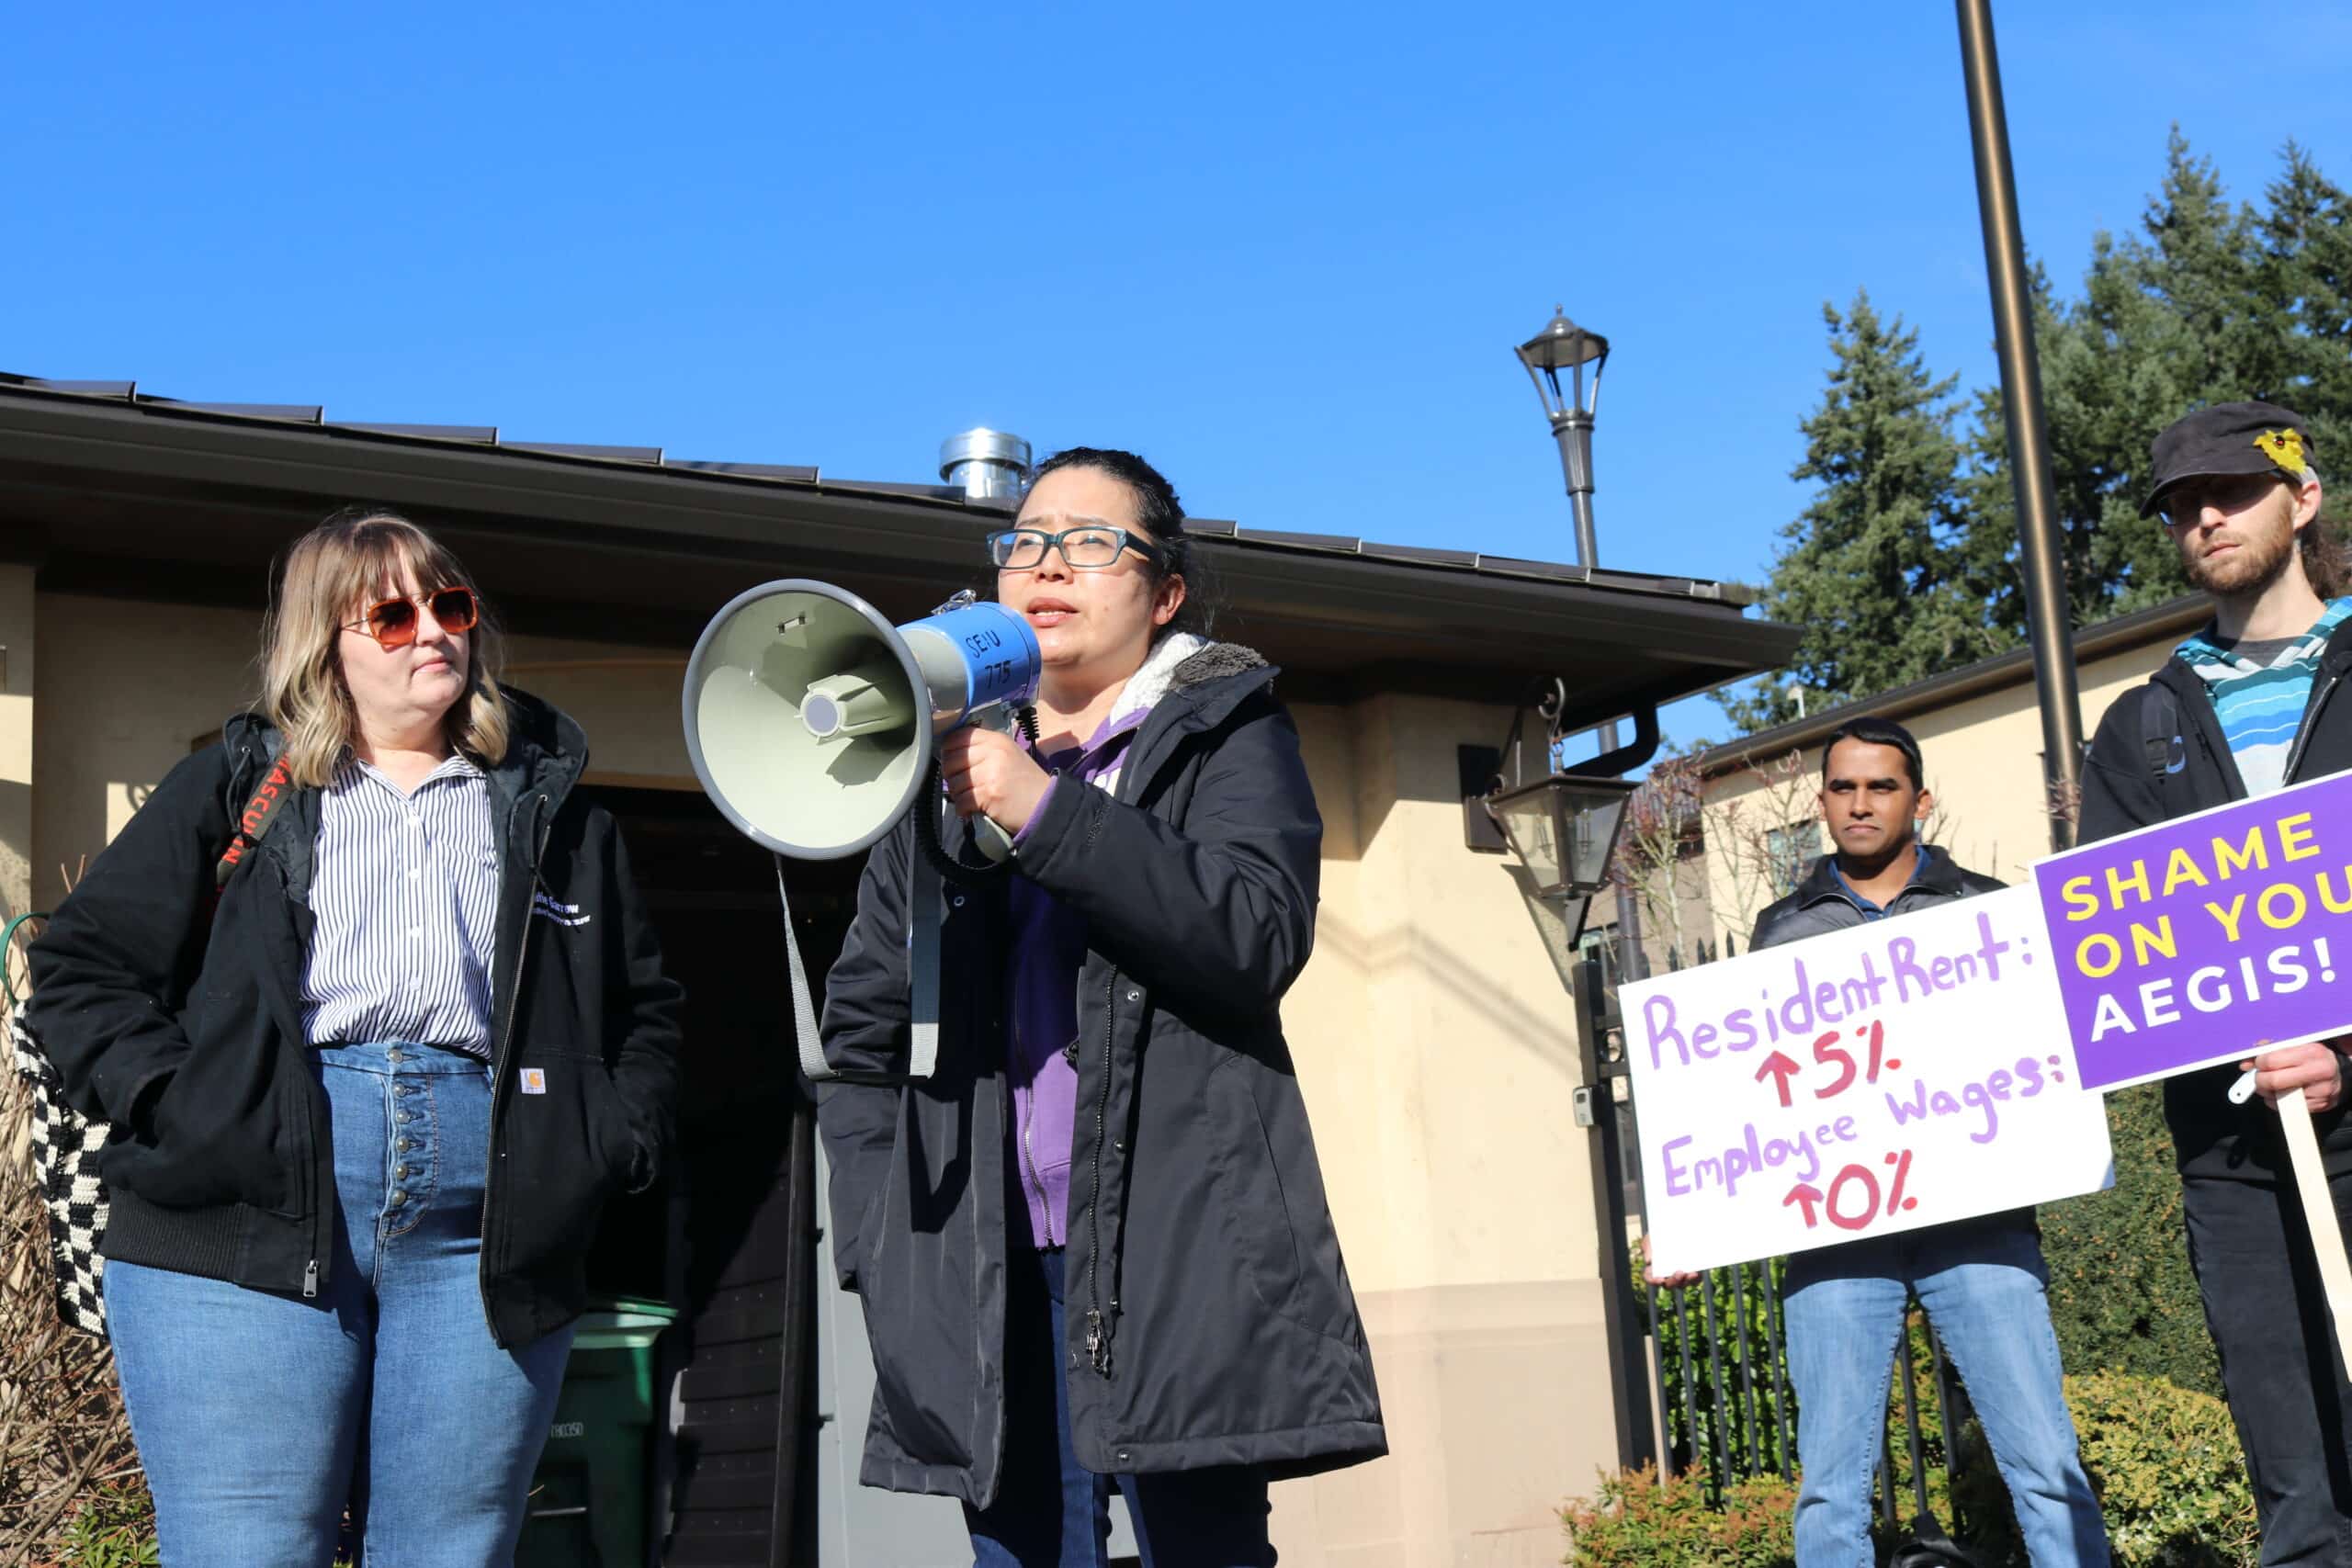 A caregiver speaks with a megaphone